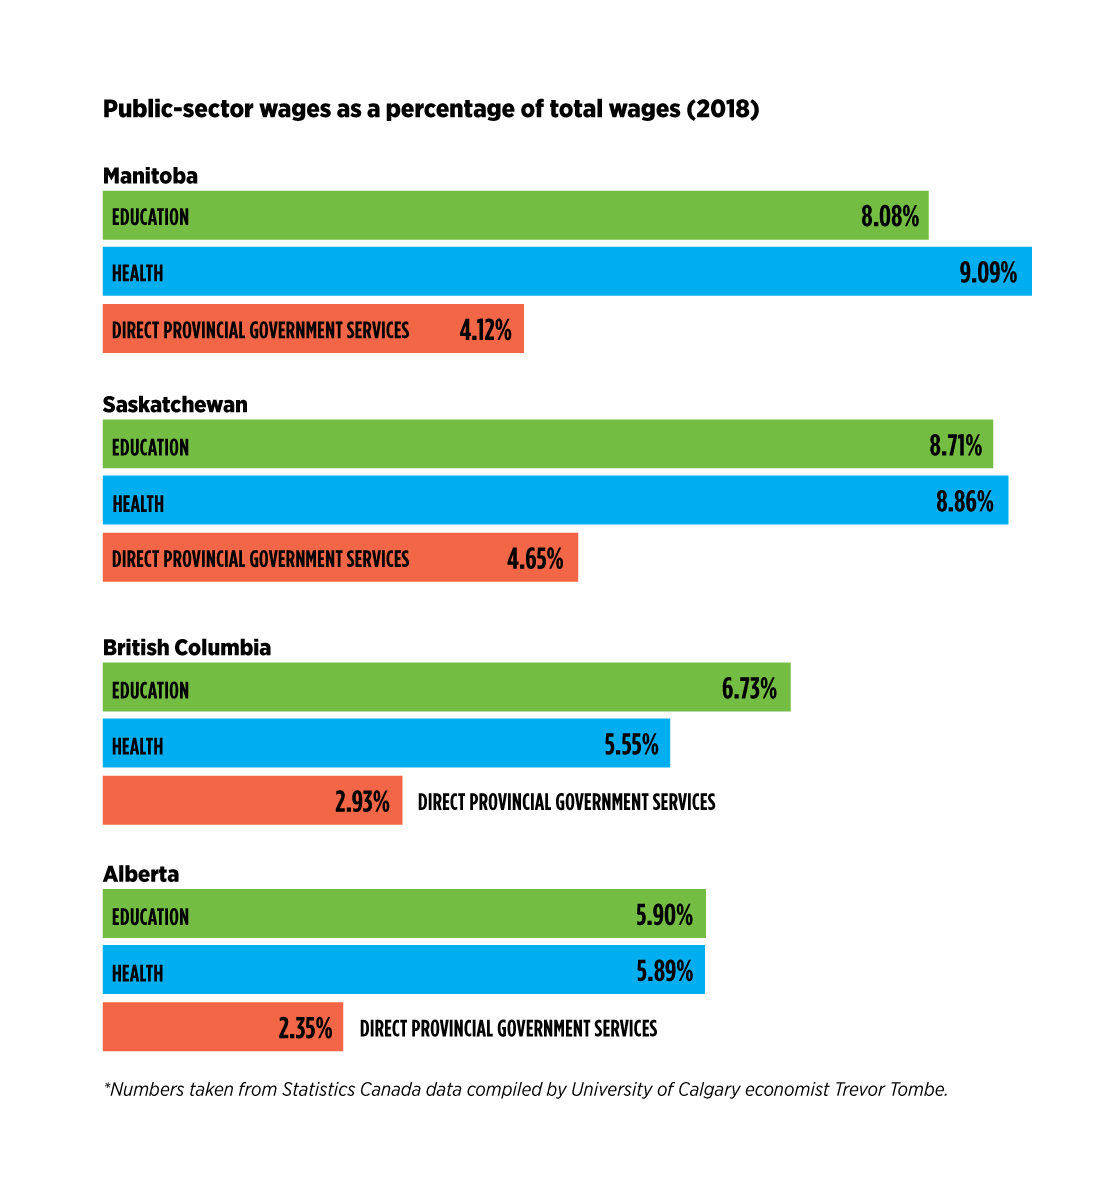 Bar graph of public-sector wages as a percentage of total wages (2018)